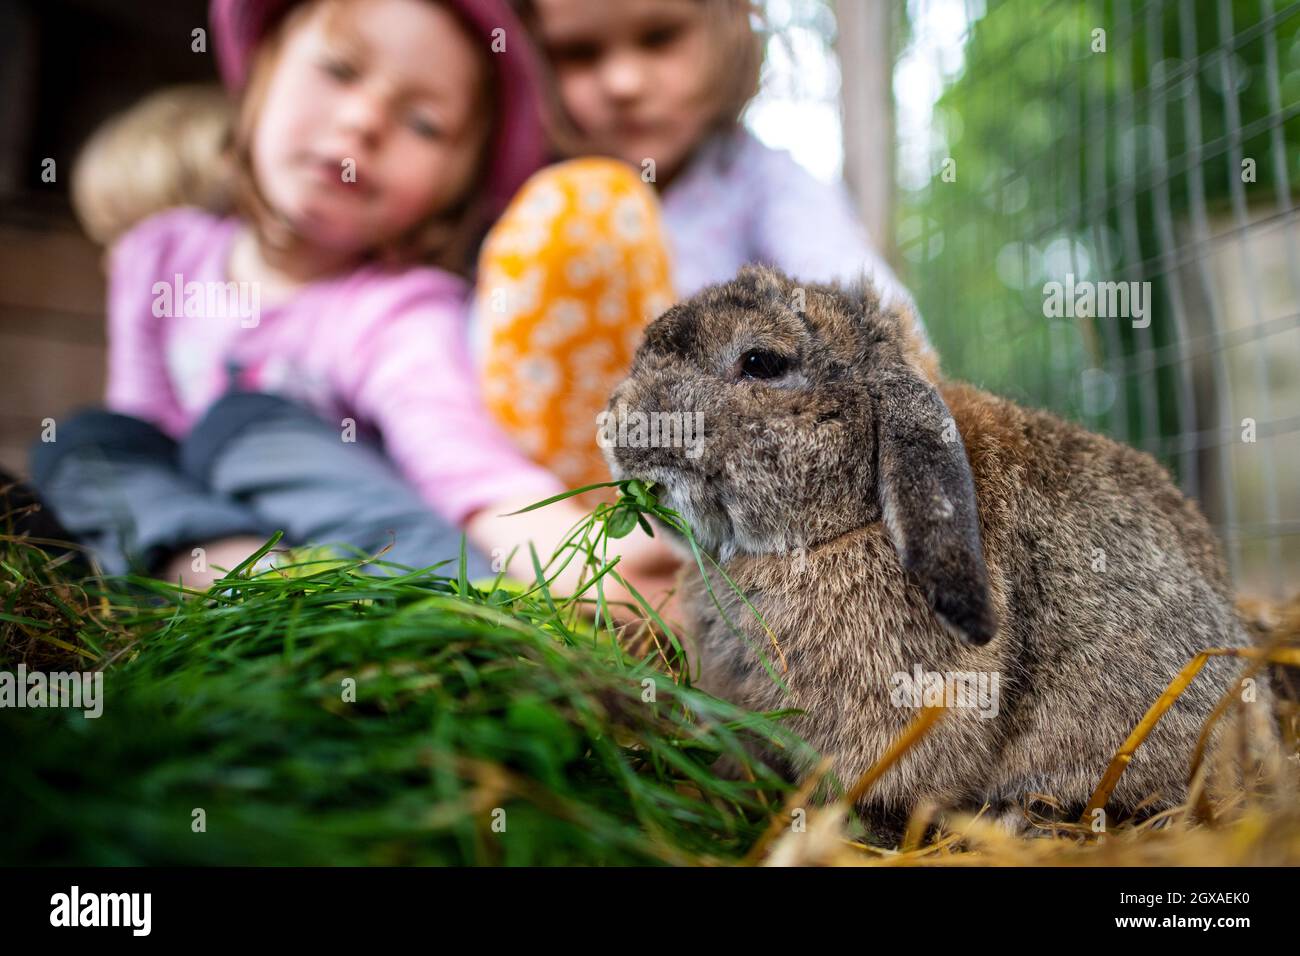 27 September 2021, Lower Saxony, Löningen: A rabbit is fed grass by children on a farm. Nature, animals and lots of fresh air - many families have spent their summer holidays on a holiday farm. Lower Saxony's country farms are also popular destinations for the coming autumn holidays. Photo: Sina Schuldt/dpa Stock Photo